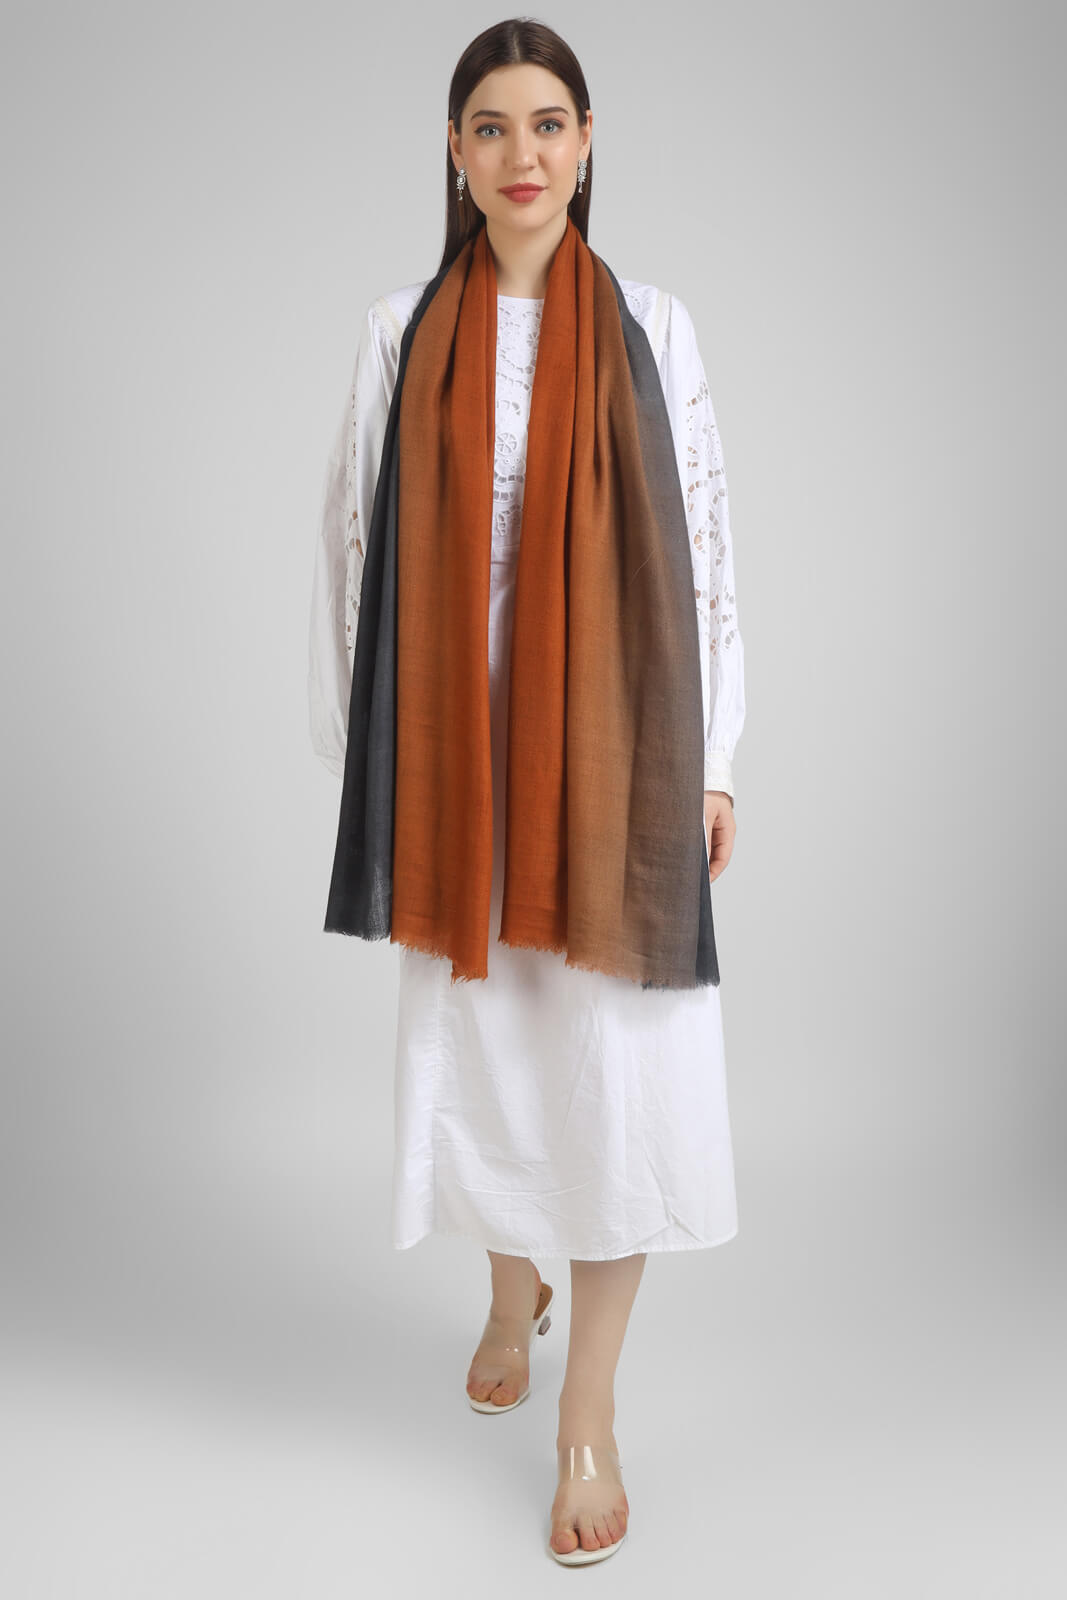 pashmina stoles Rust & Grey Ombre Pashmina Stole – a fusion of warm tones and cool grays.-  We deliver our premium Pashmina products to the United Kingdom, Germany, France, Japan, UAE, and Australia. Elevate your style with ease – order now!"